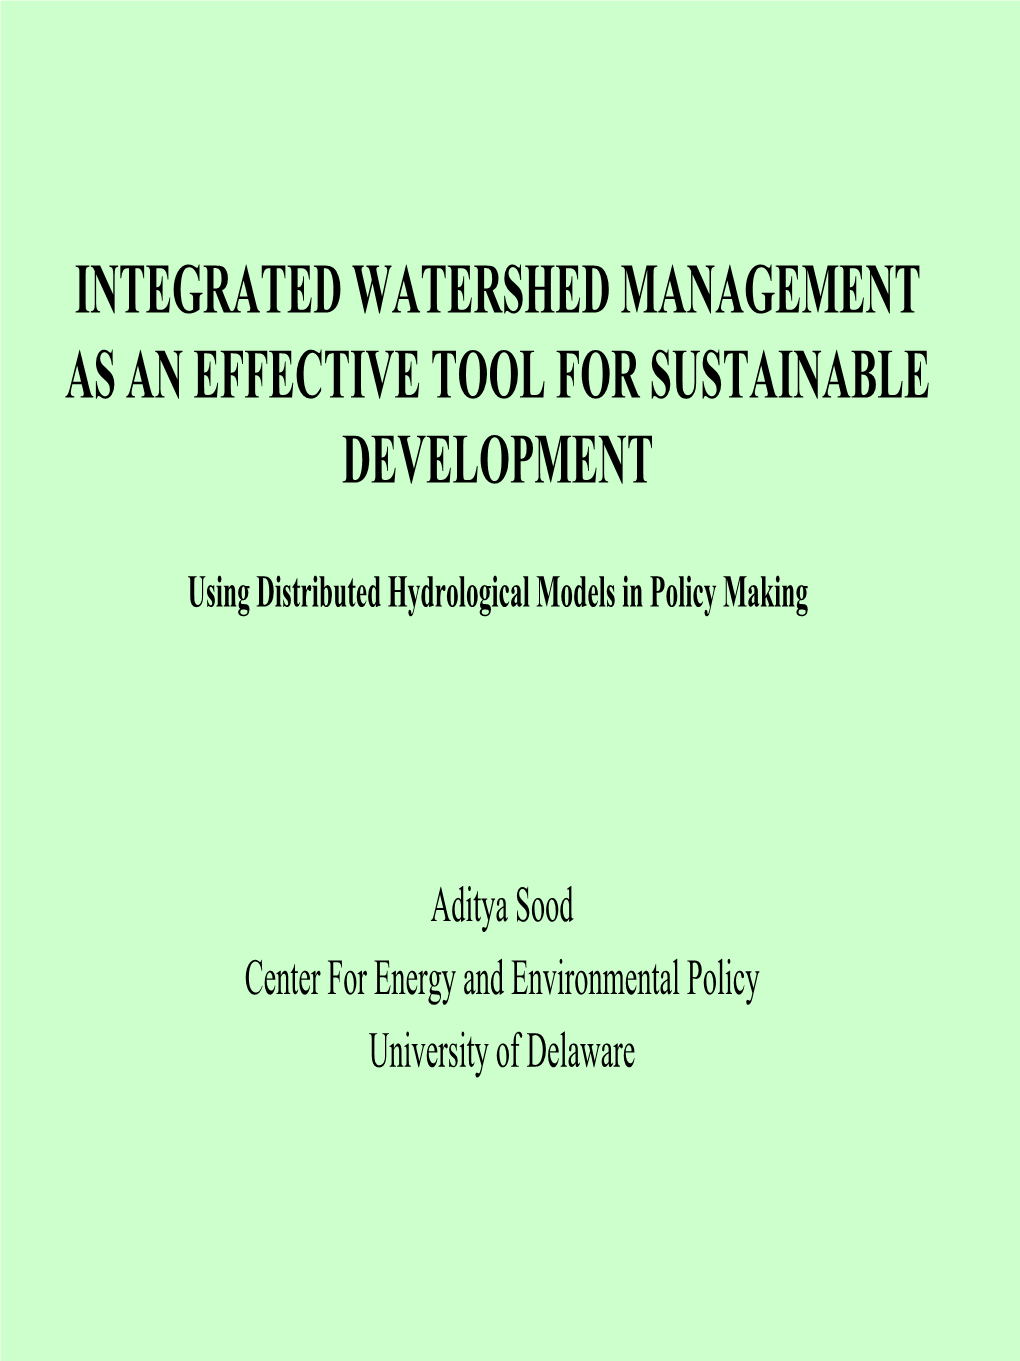 Integrated Watershed Management As an Effective Tool for Sustainable Development